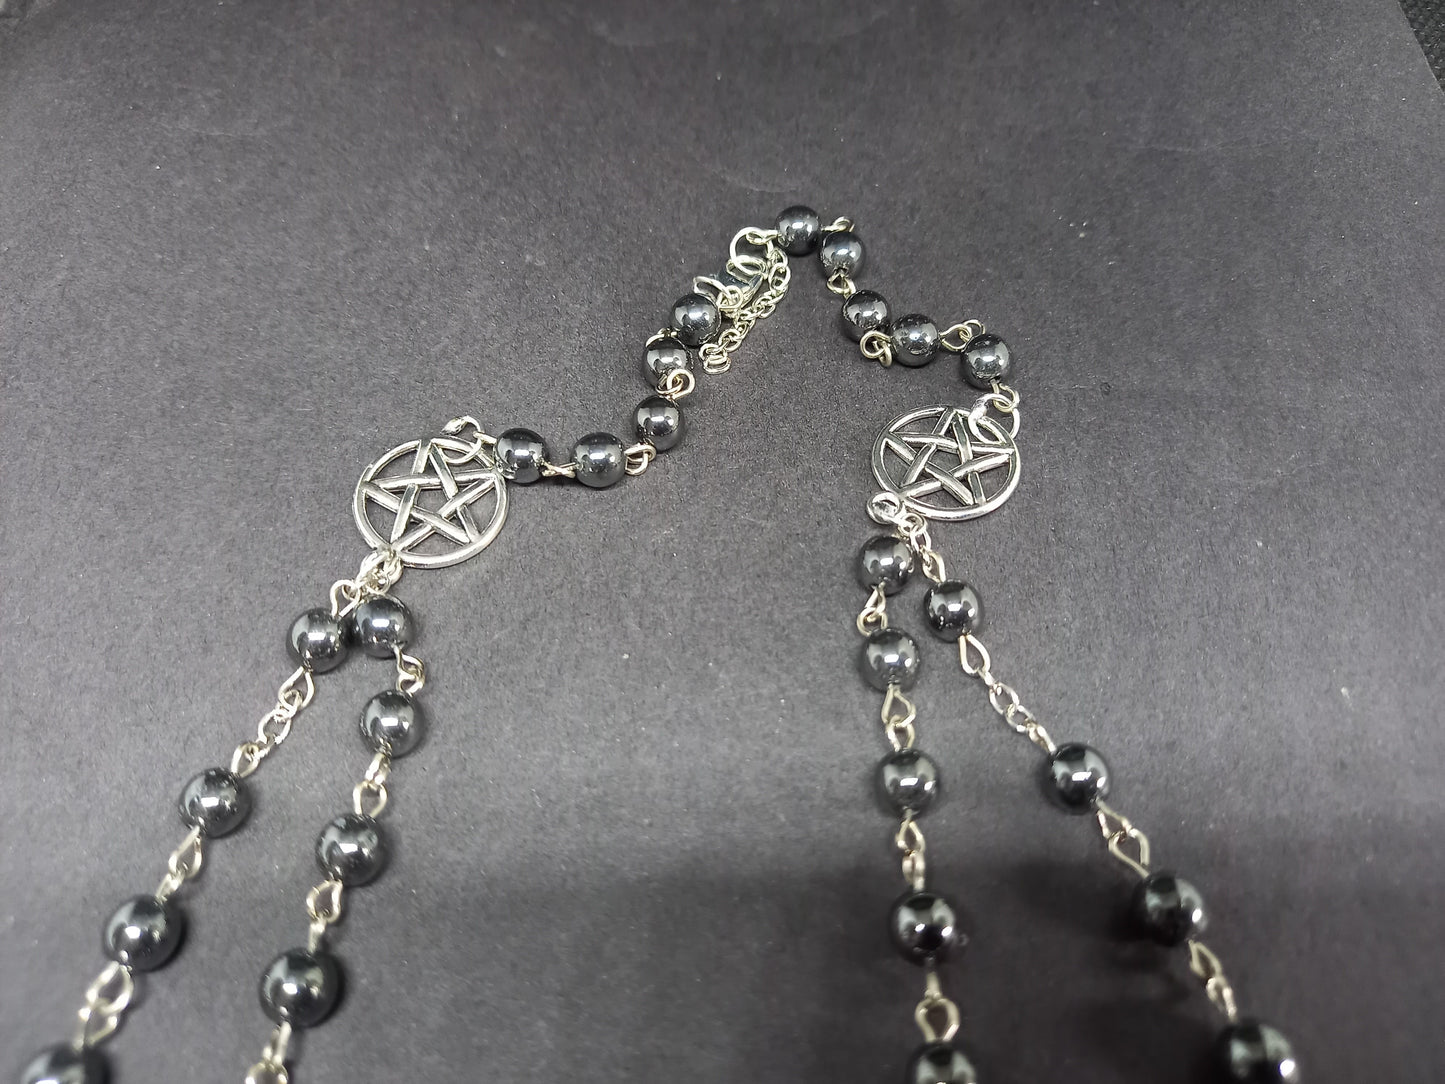 Occult "Satanic Trinity ,three inverted crosses with inverted pentagram" double layer rosary